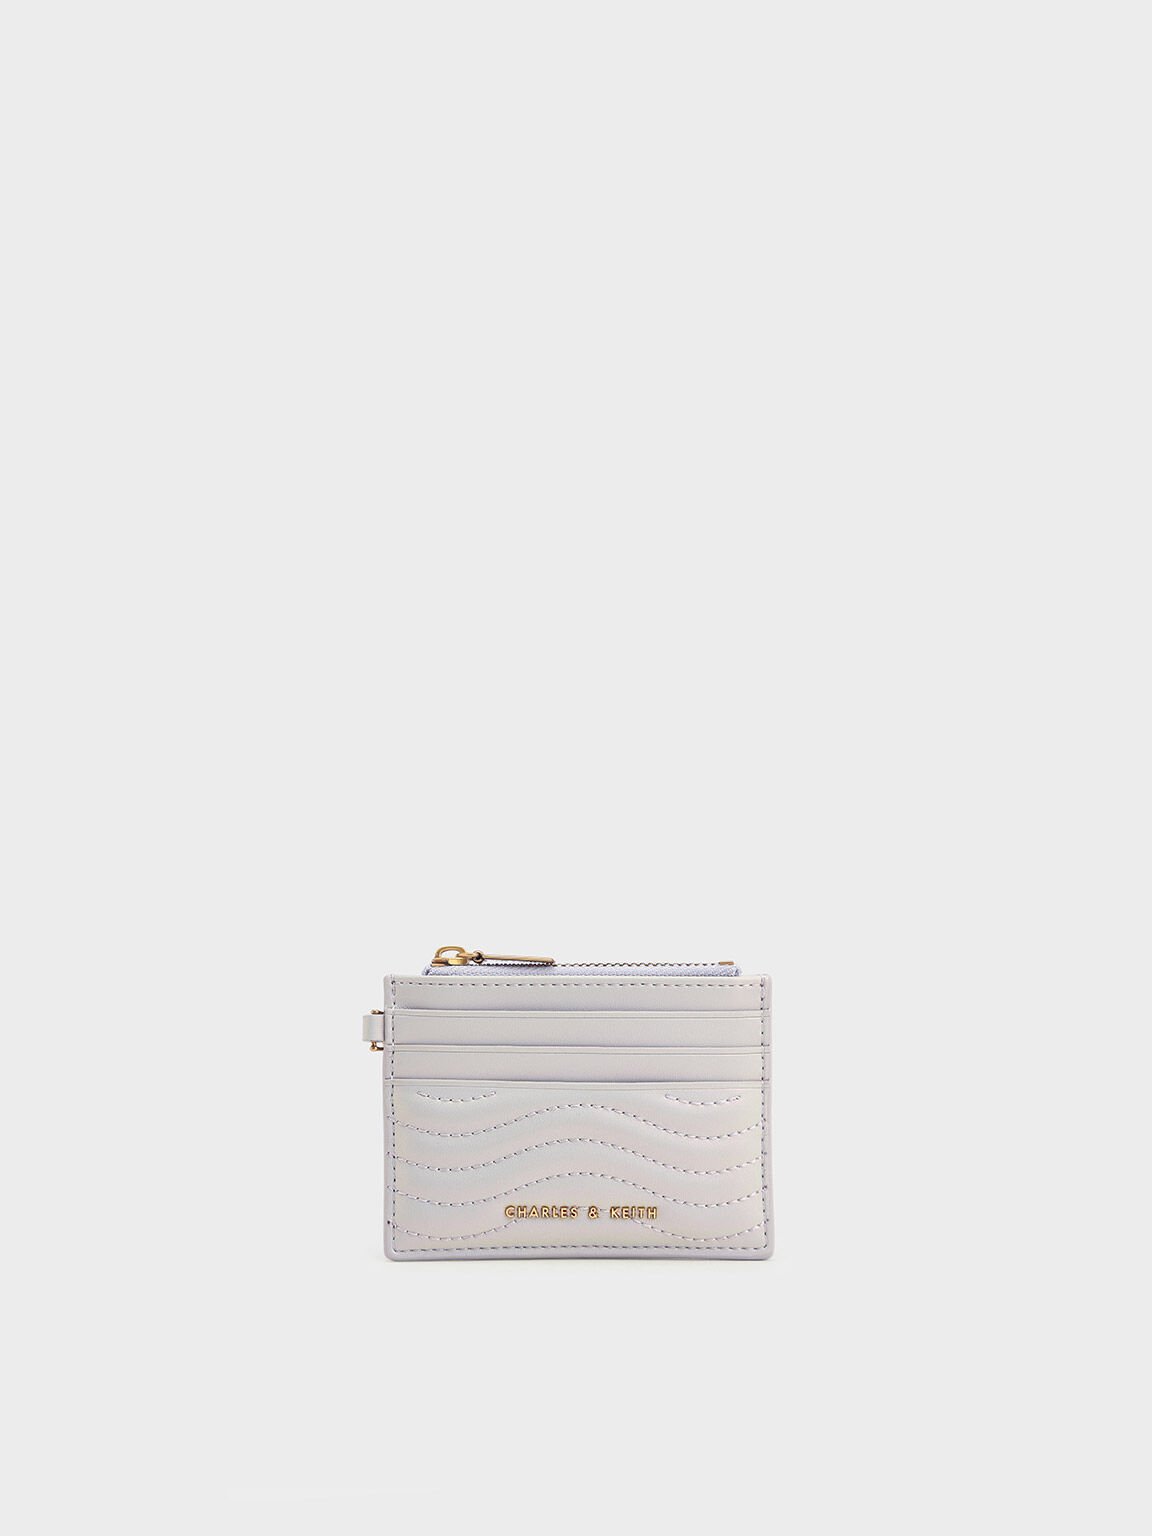 Charles & Keith Card Wallet Wallets for Women